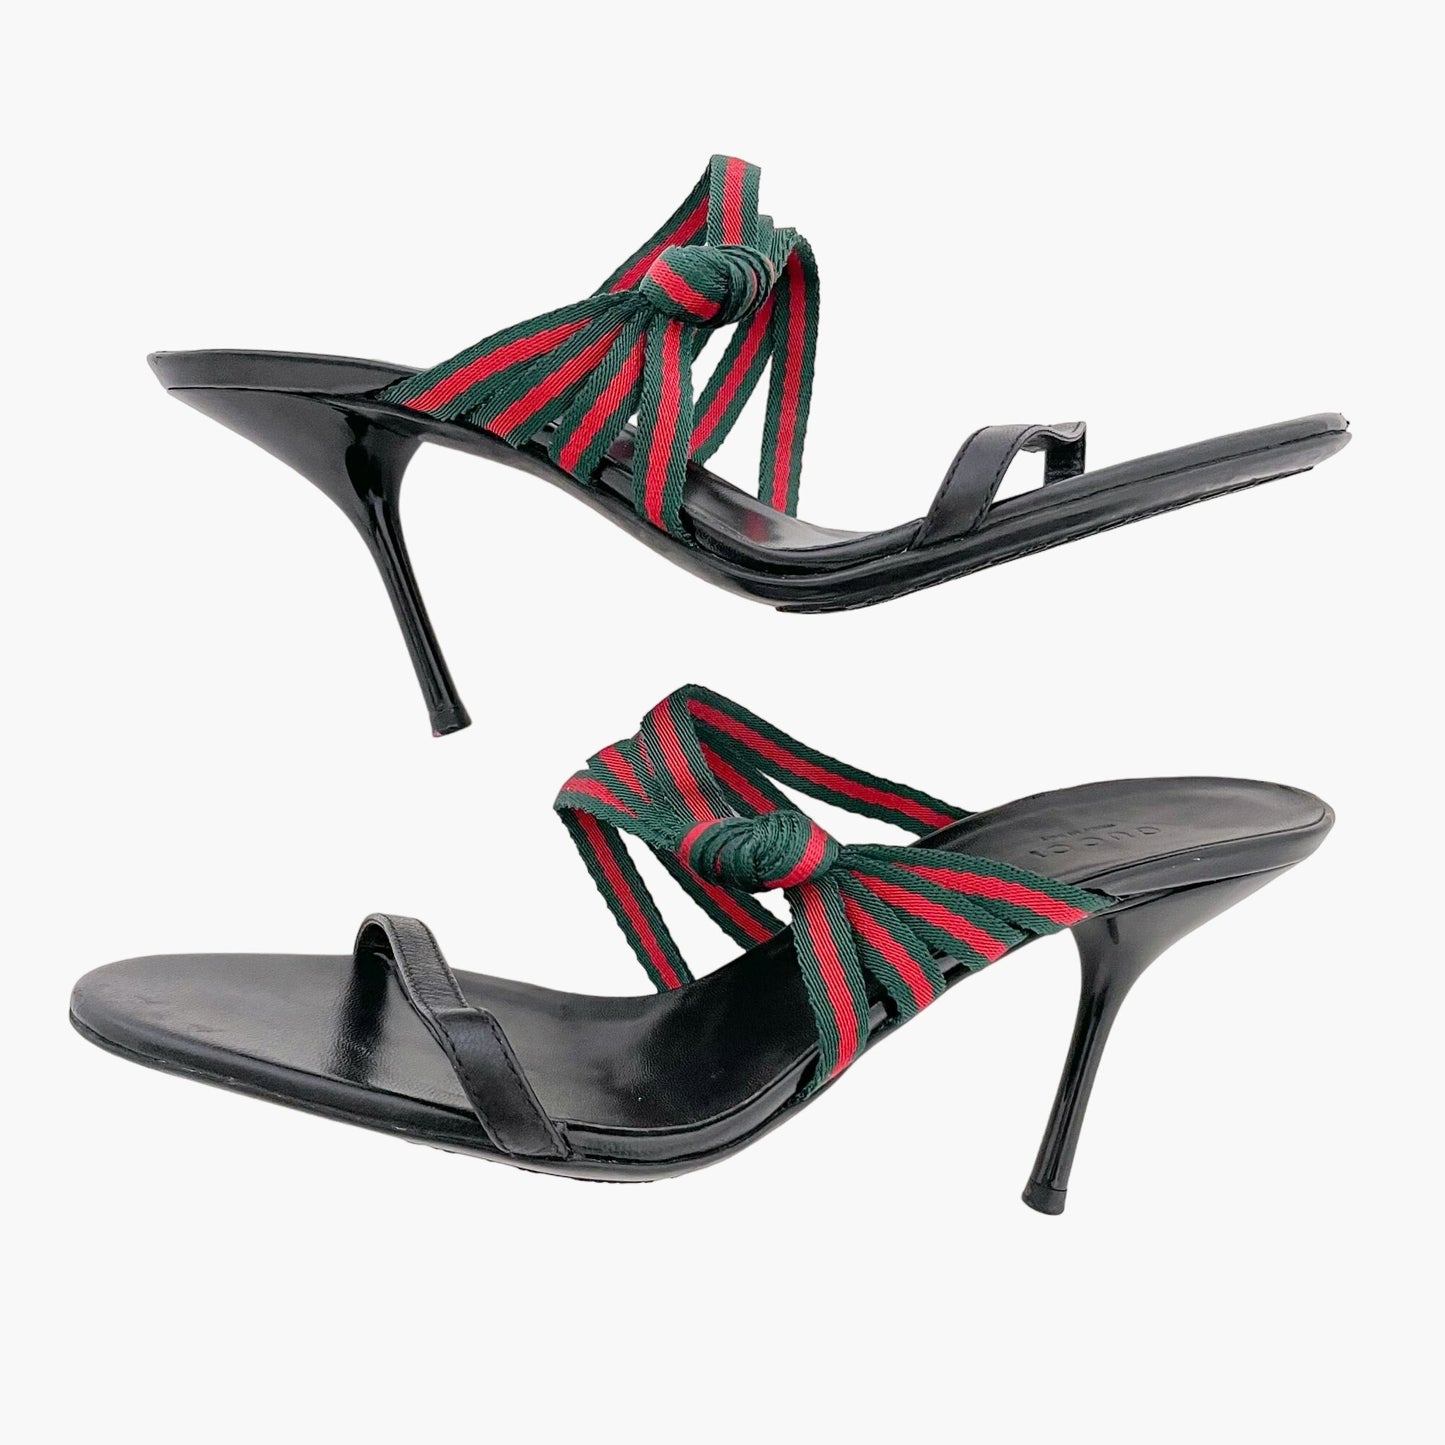 Gucci Mirabelle Knotted Web Stripe Mule Sandals in Black Size 9